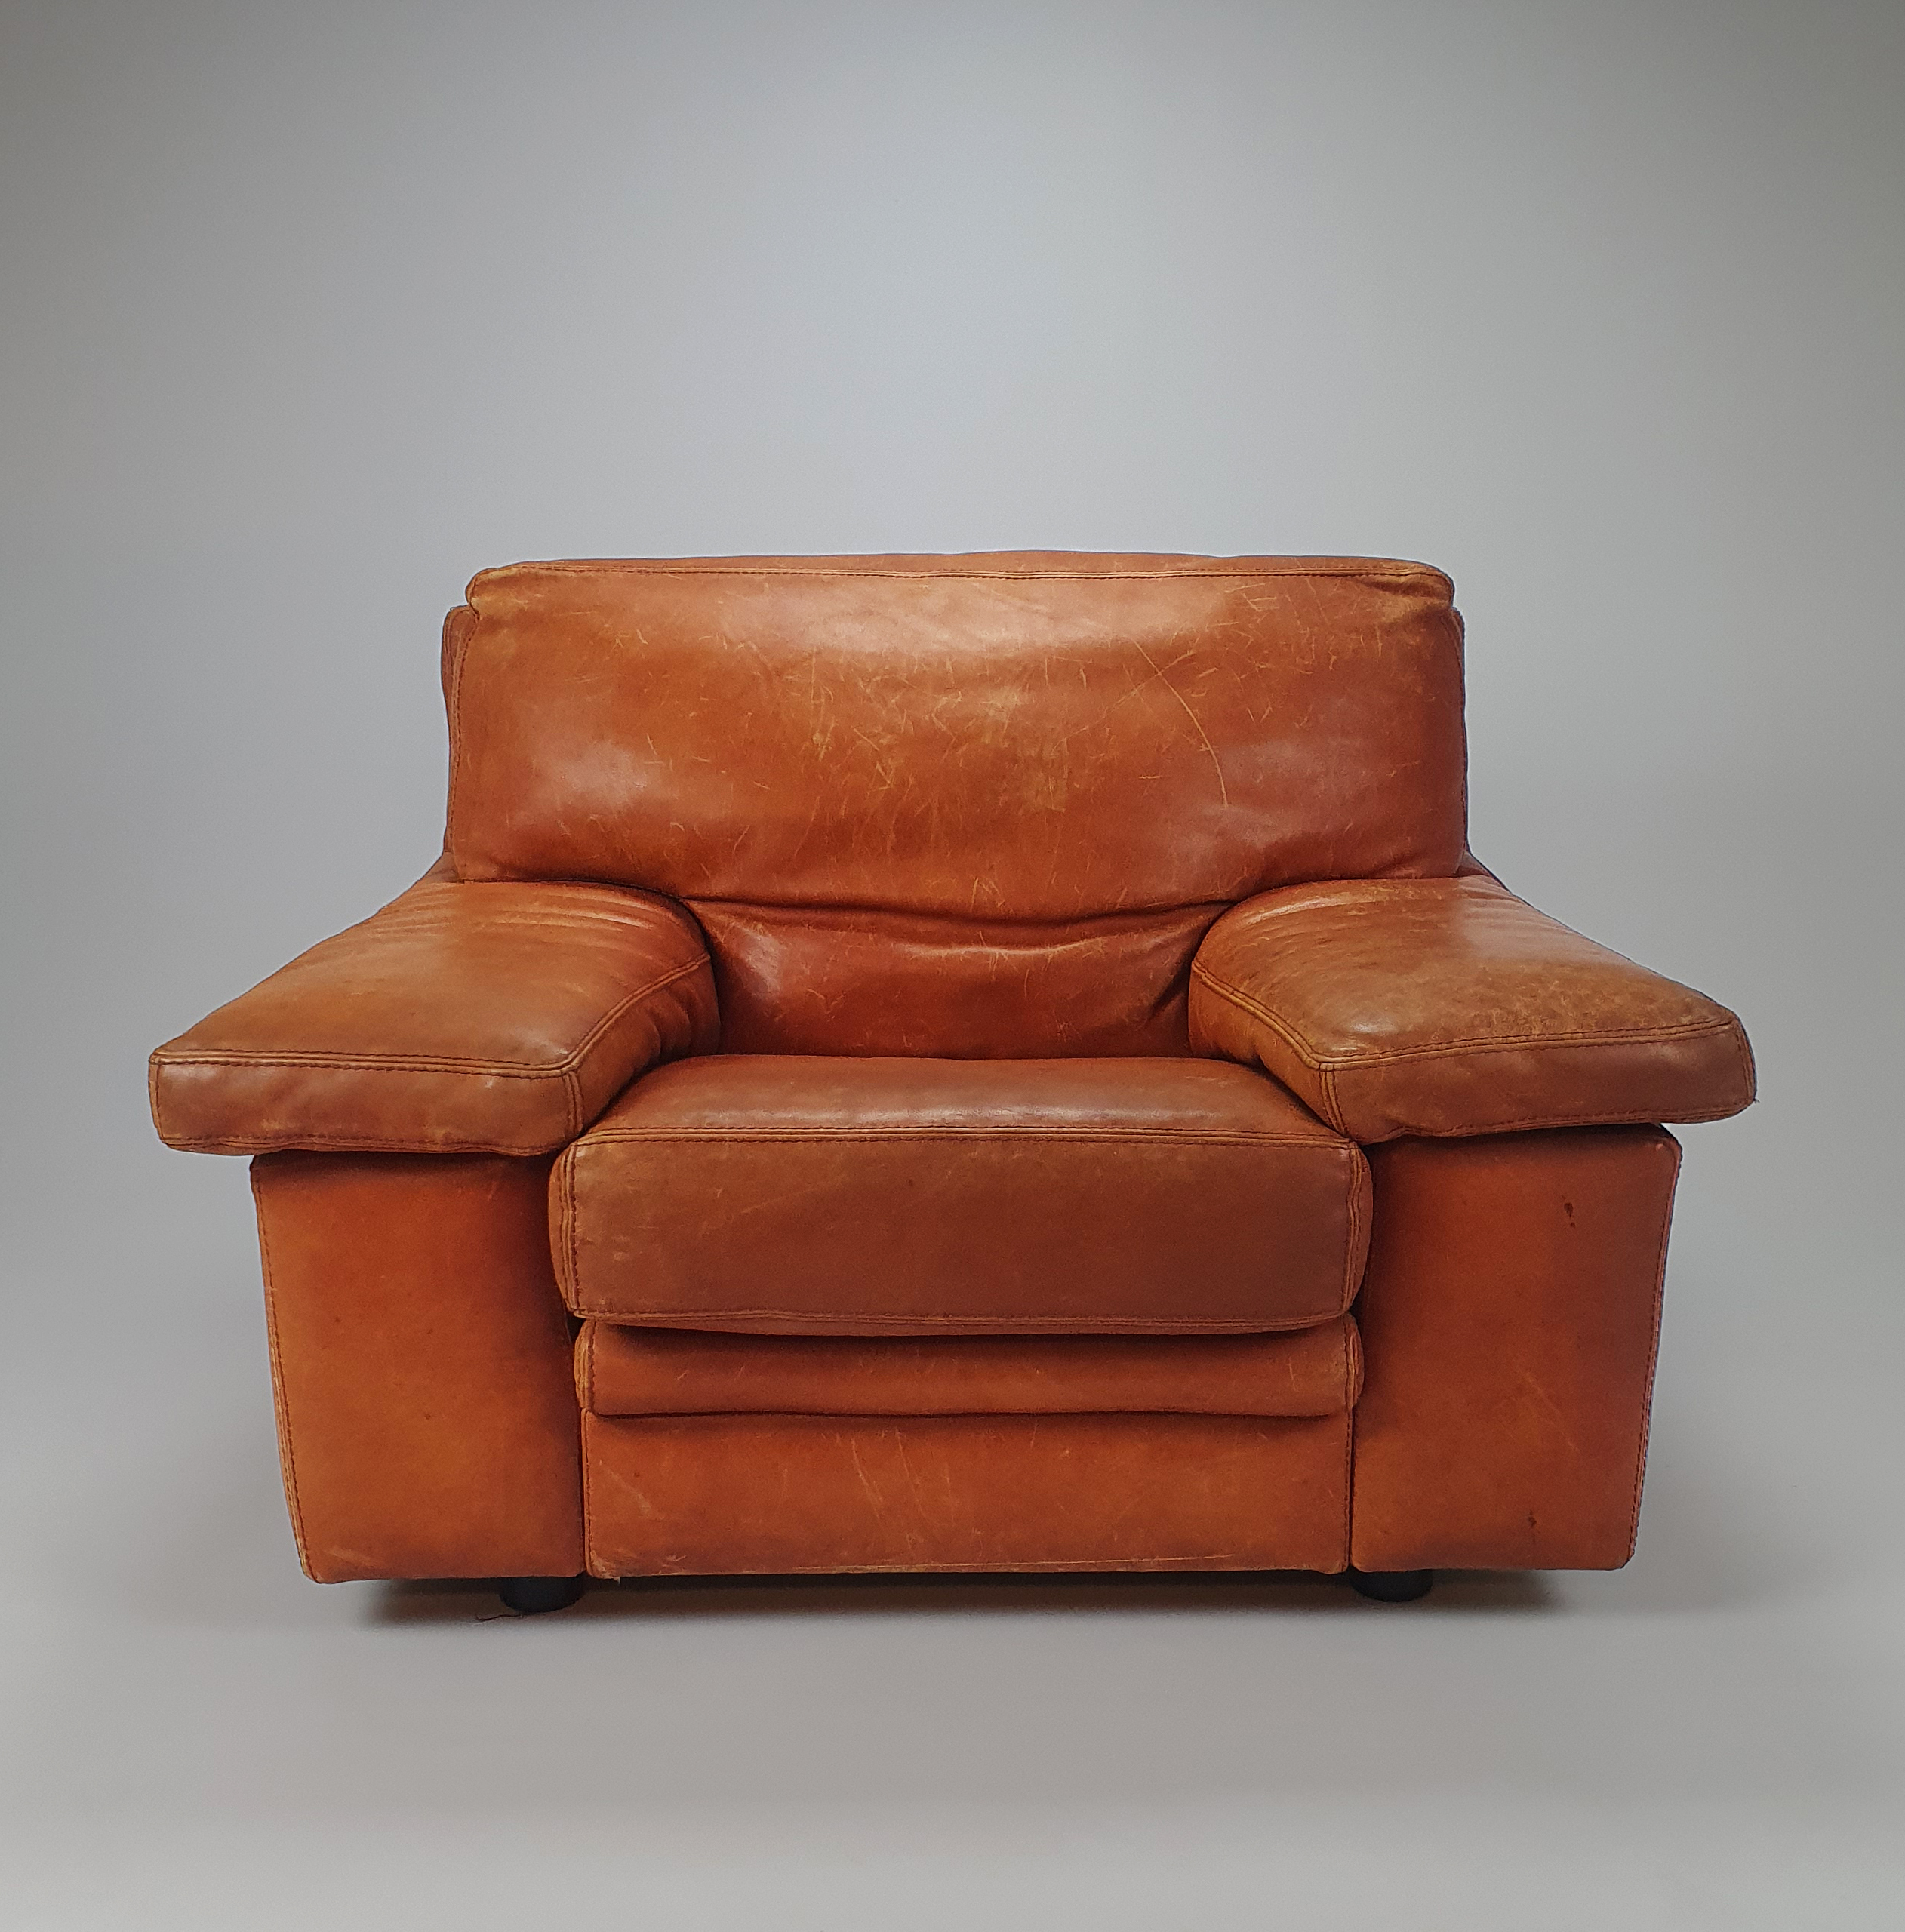 Roche Bubois leather lounge chair